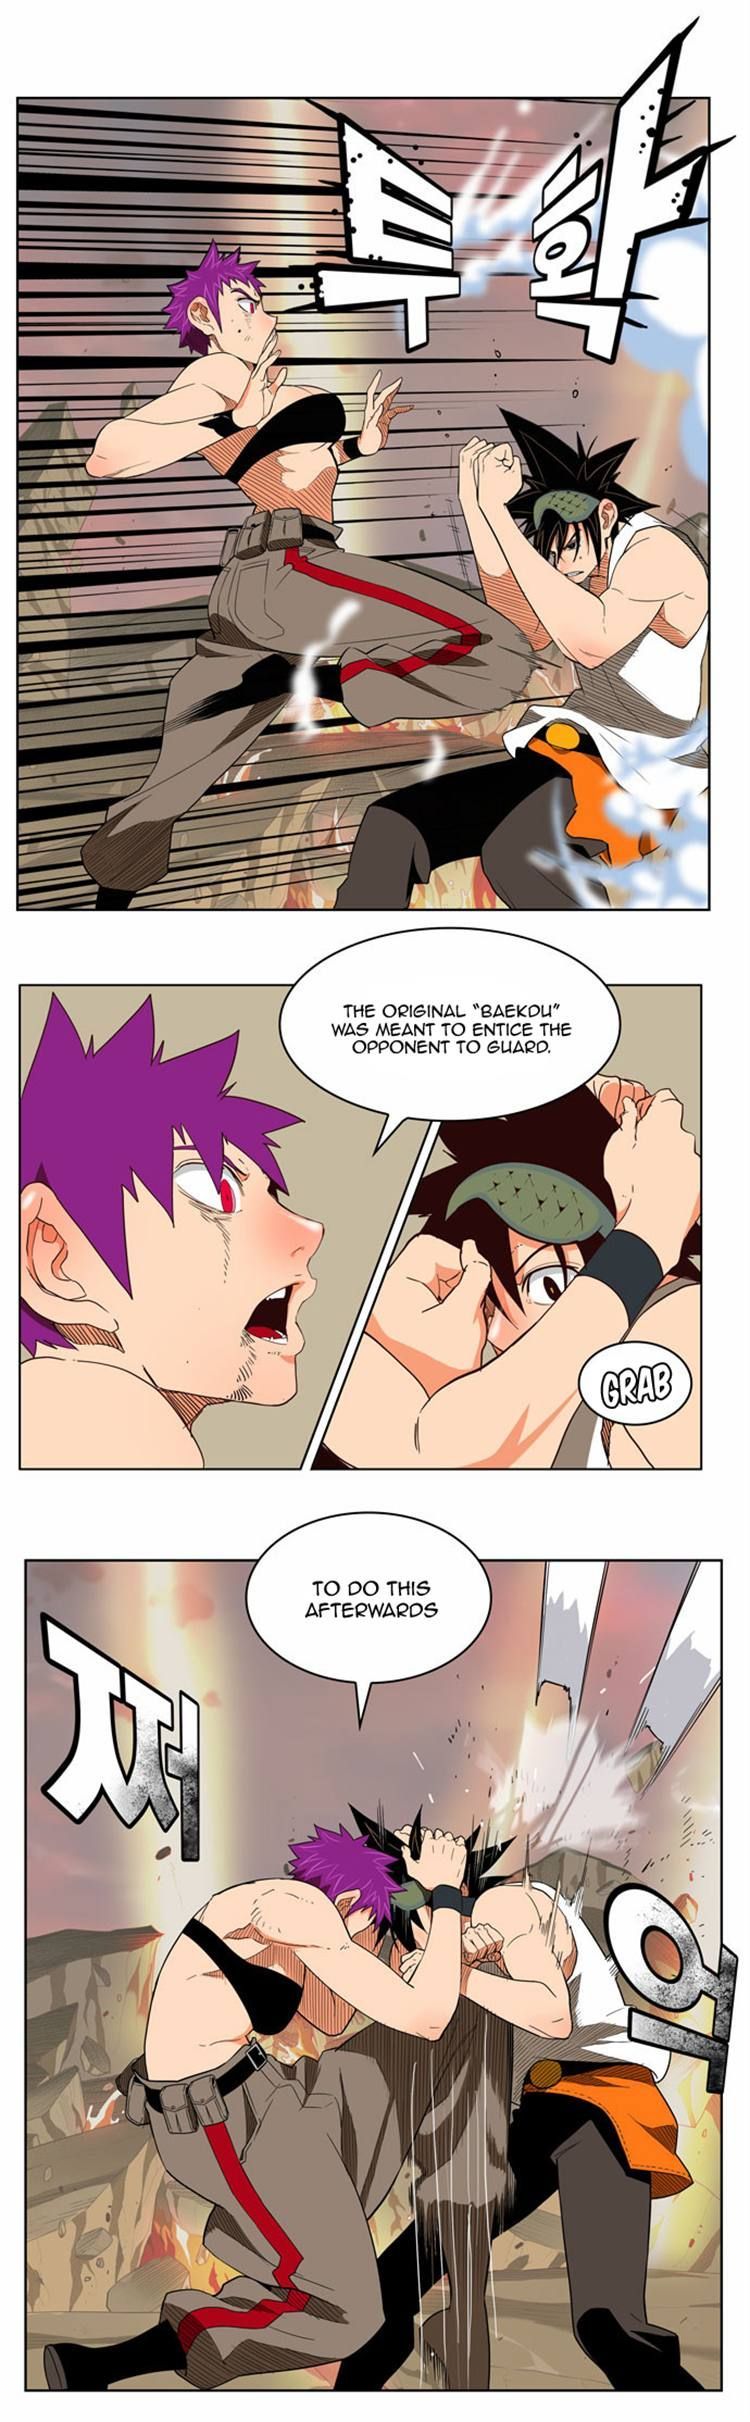 The God of High School Chapter 164 - Version 2 page 7